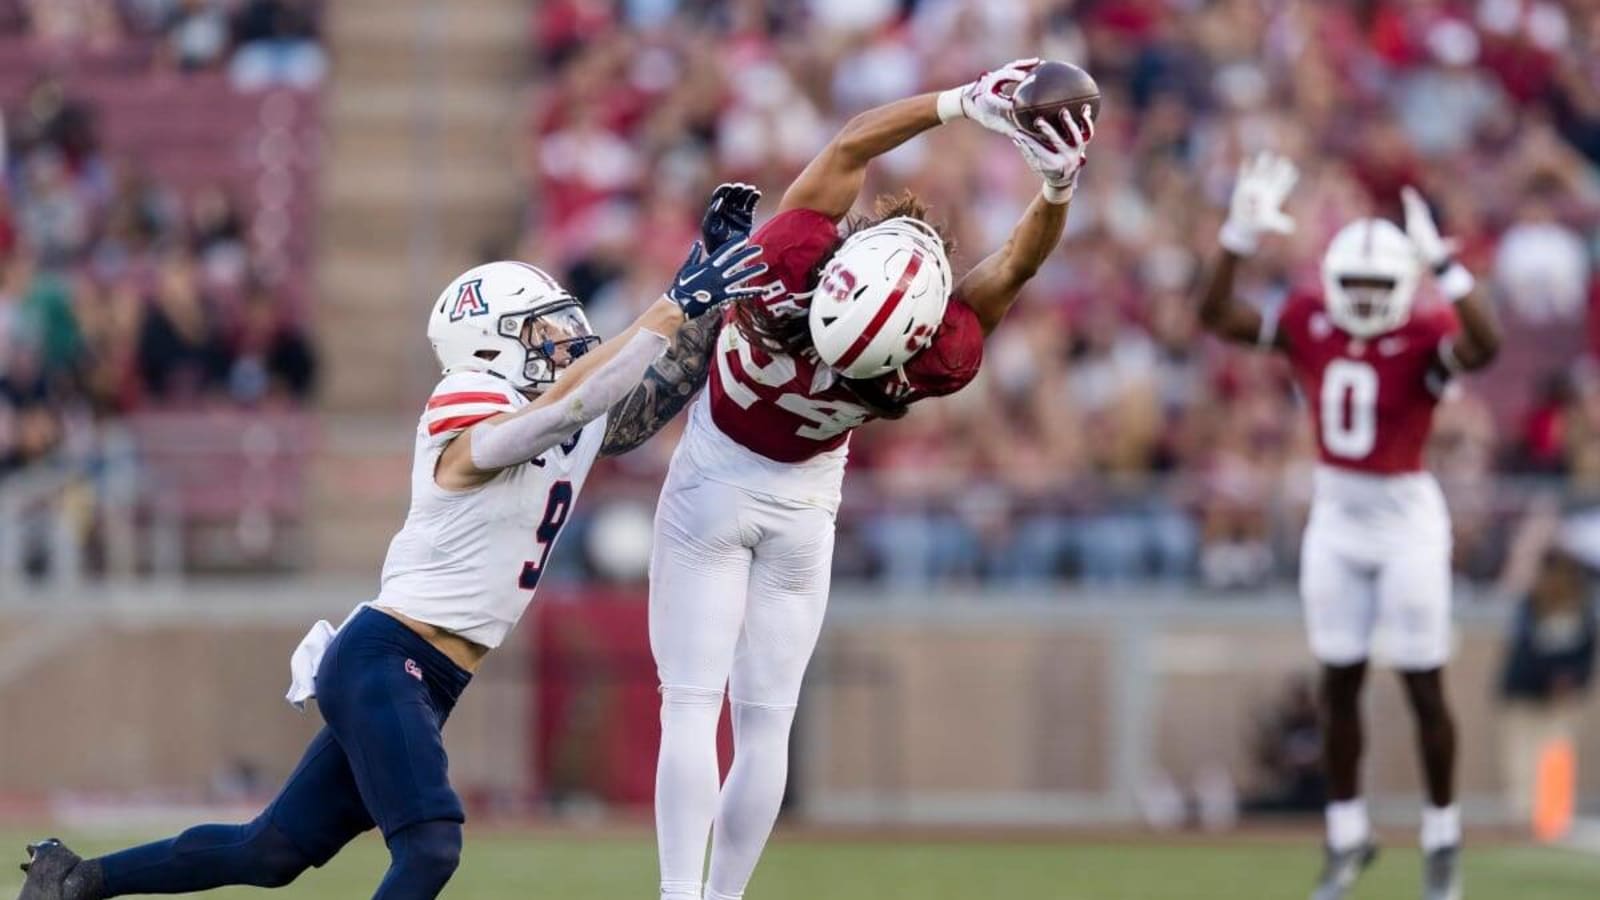 &#39;Can&#39;t Kick It&#39;: Stanford Comes Up Just Short In Loss To Arizona